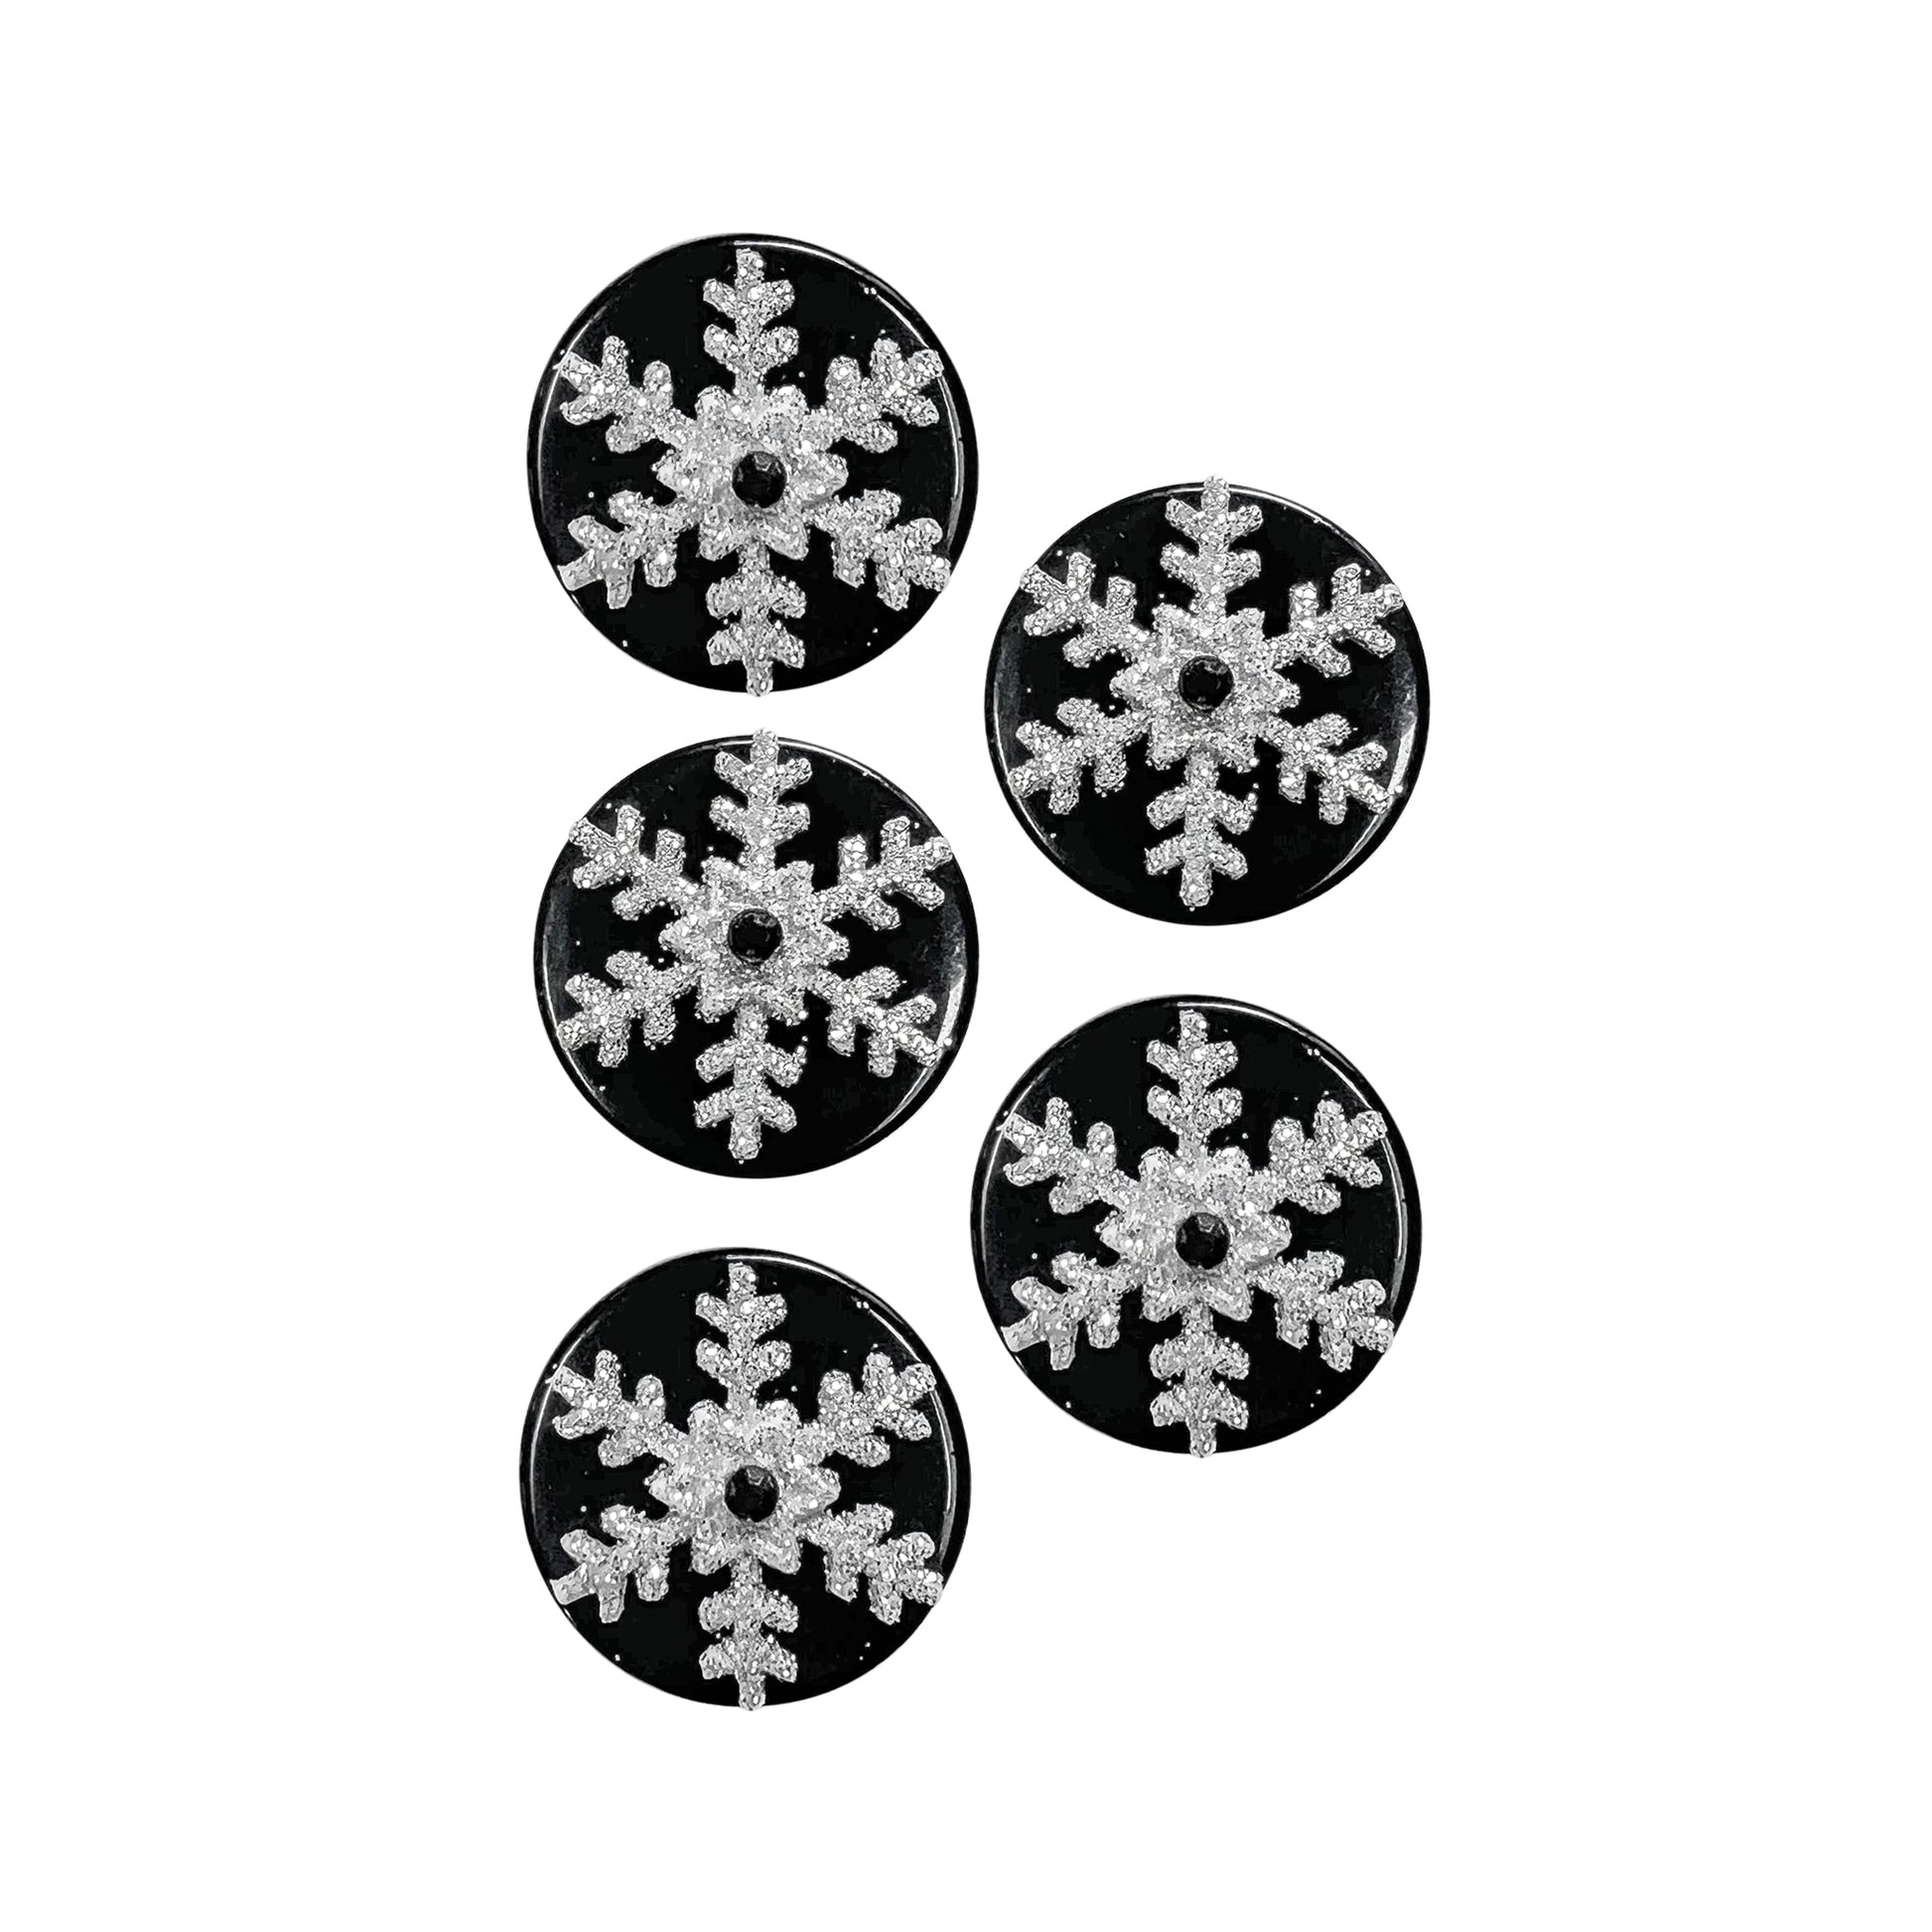 Glass Wrappings' set of 5 Medium Glitter Snowflakes embellishments. Black buttons with iridescent snowflakes topped with black rhinestones.